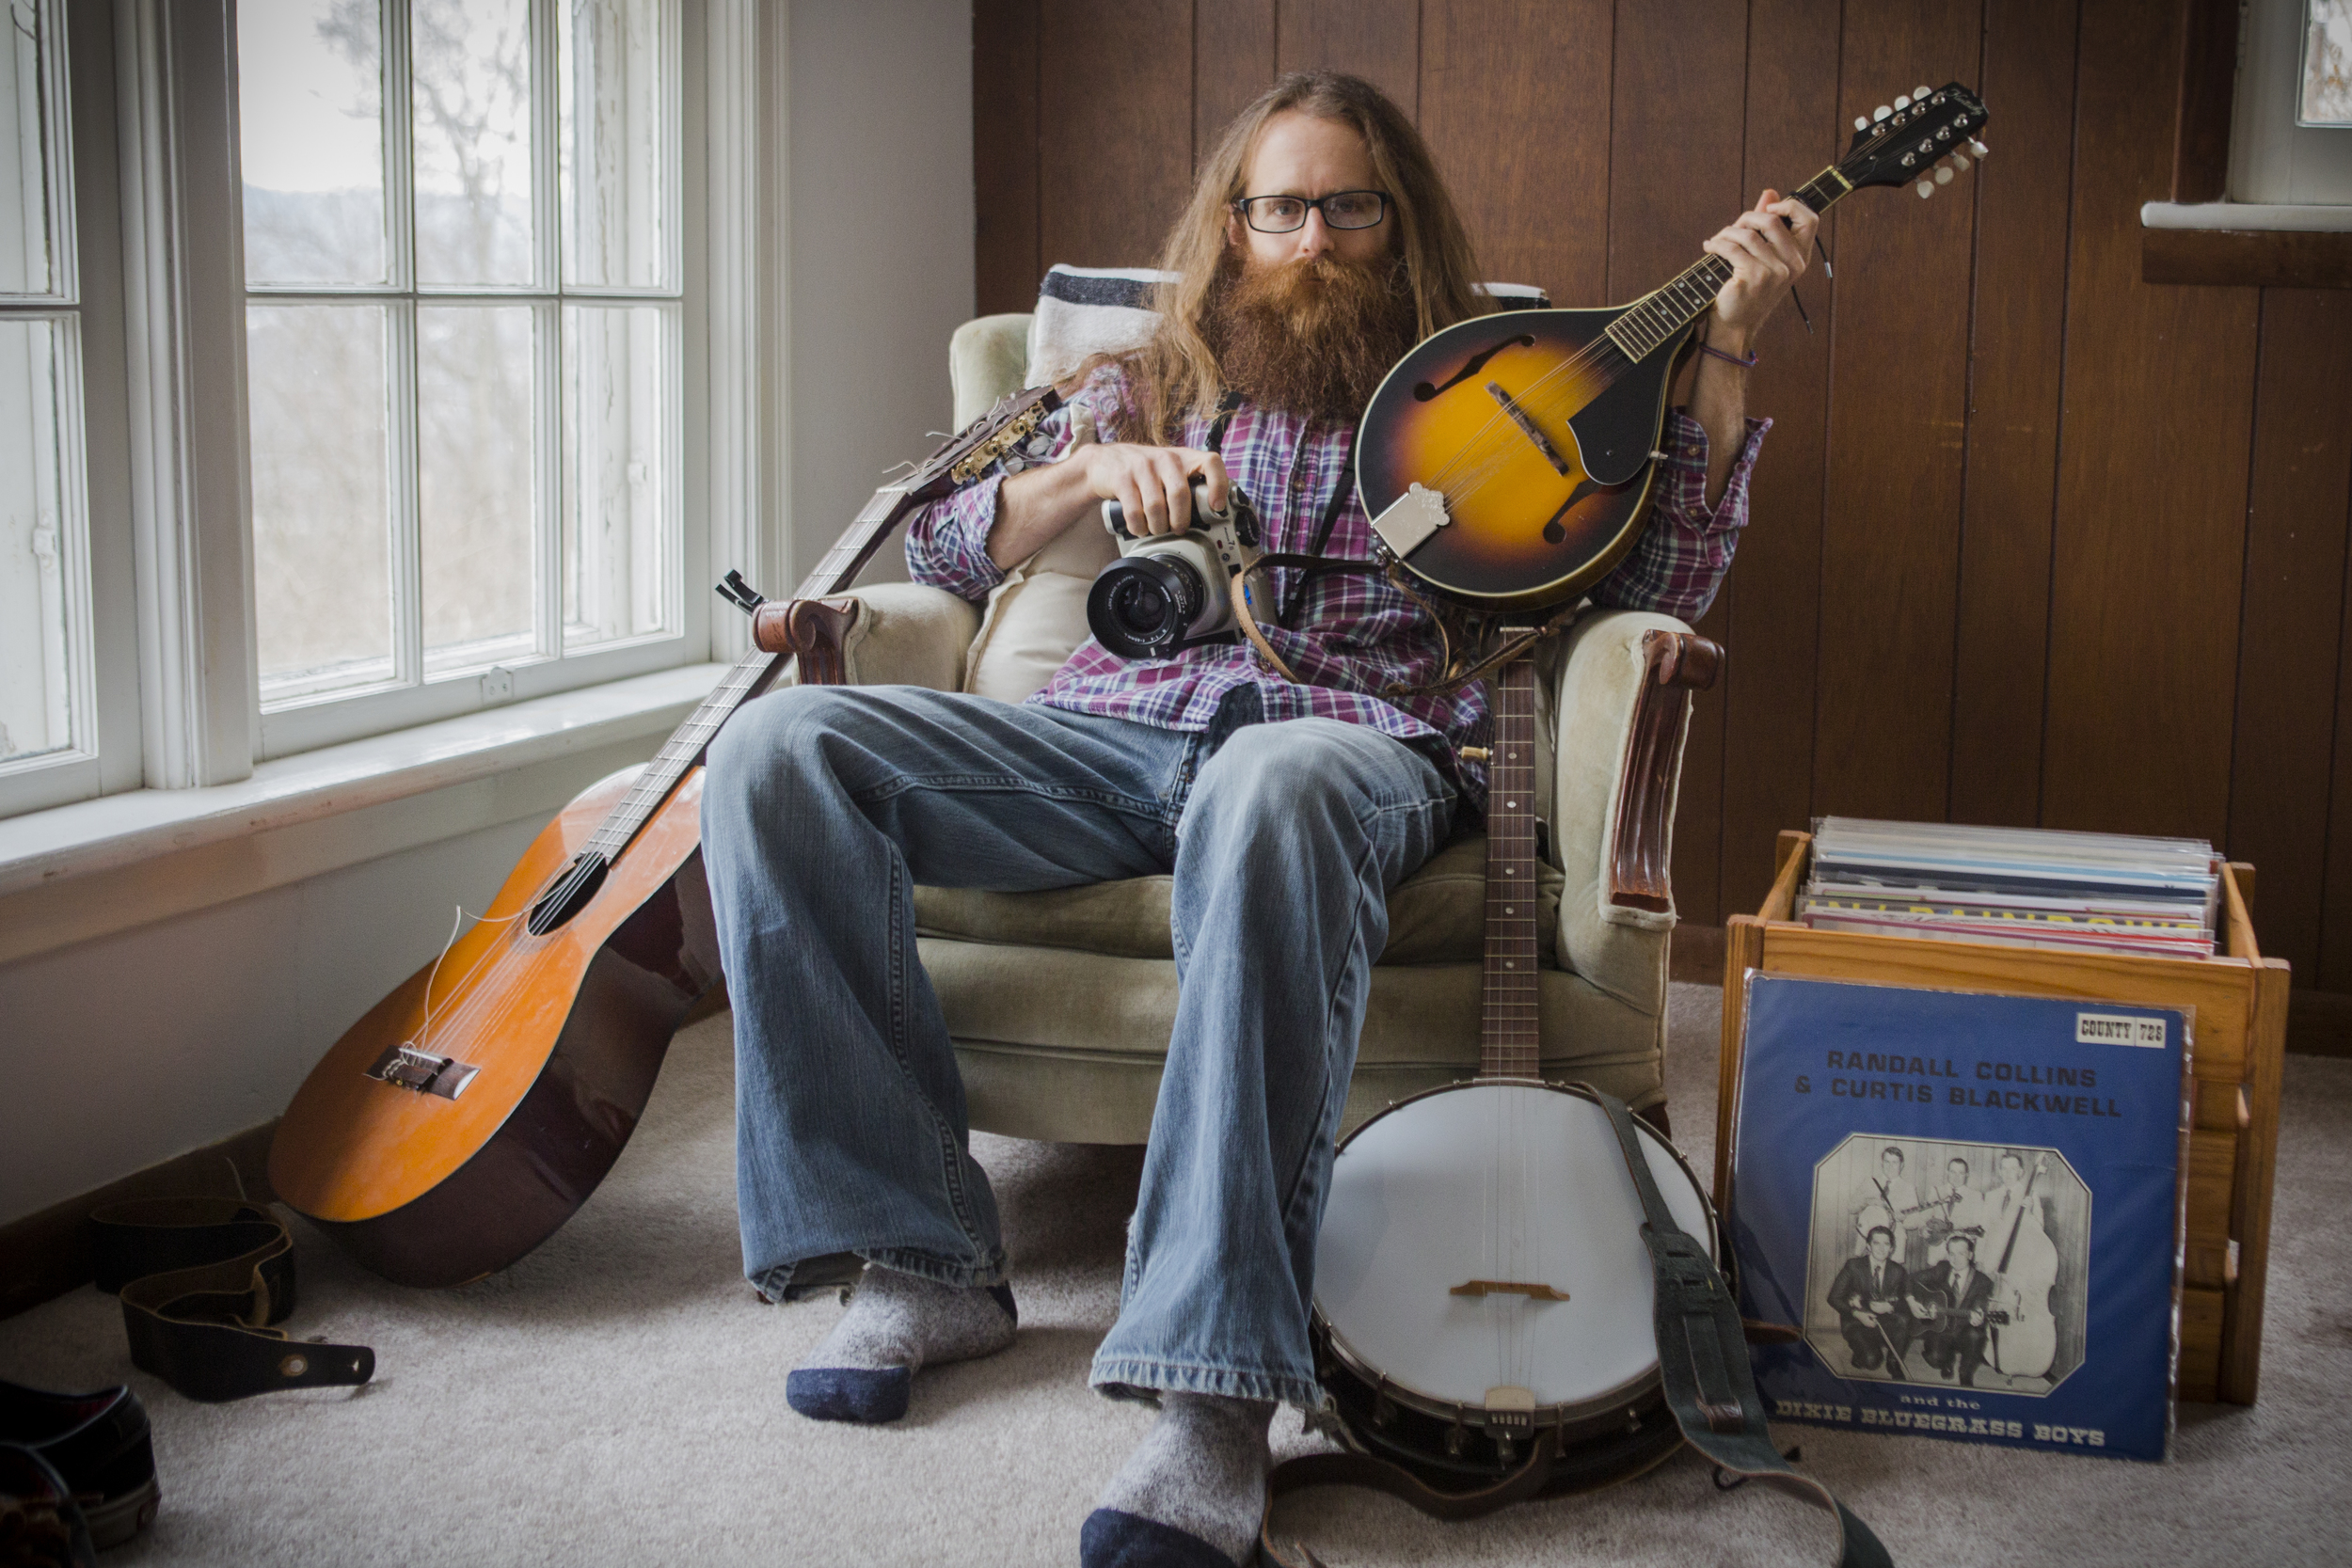  Josh Birnbaum, a photographer and musician,&nbsp;in his Athens, Ohio, home on Jan. 23, 2015. Birnbaum recently received funding for a project to document bluegrass music culture in Appalachia on film. 